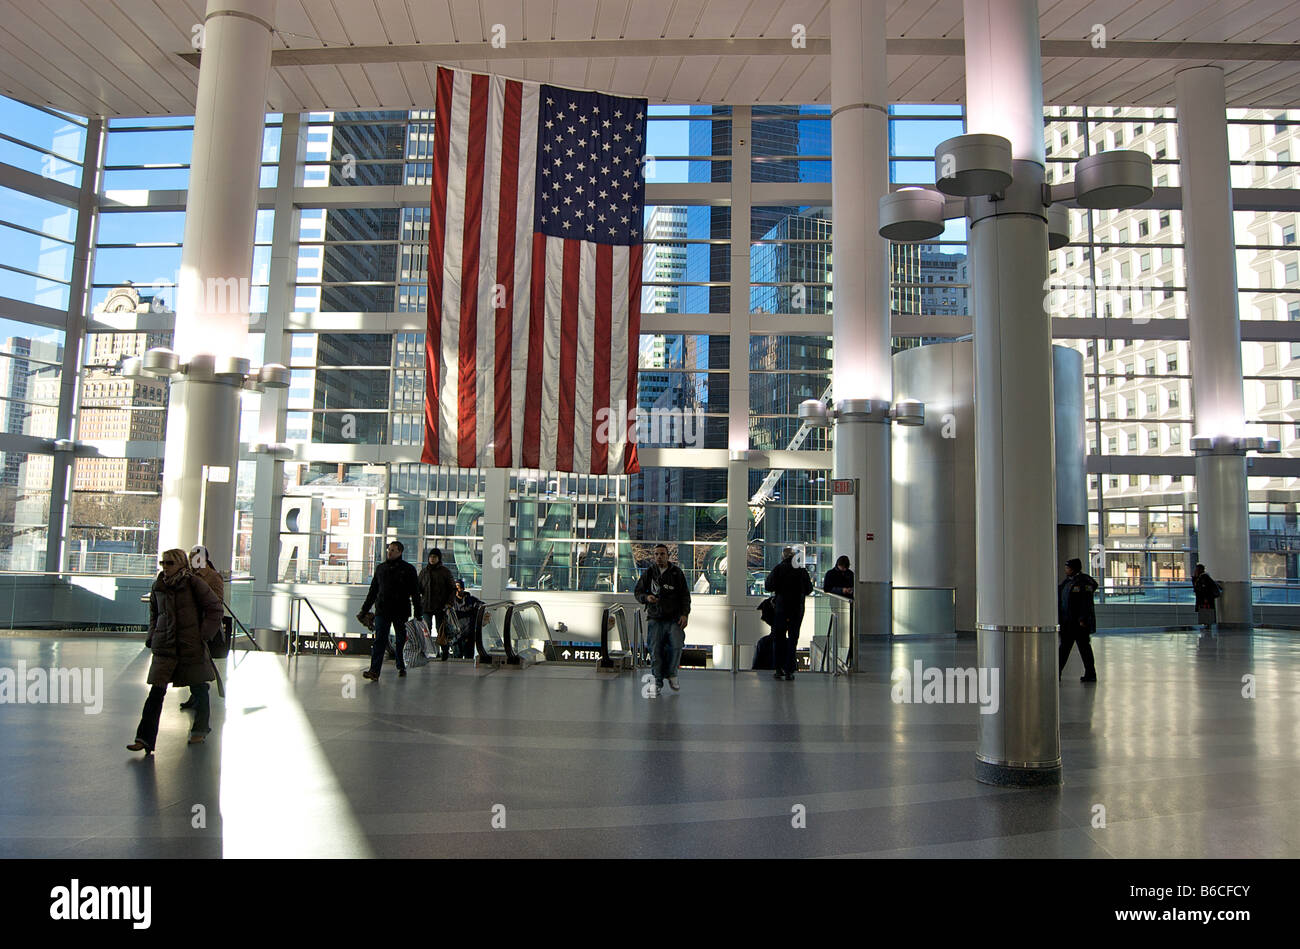 View inside Staten Island Ferry Whitehall Terminal in Lower Manhattan New York (For Editorial Use Only) Stock Photo